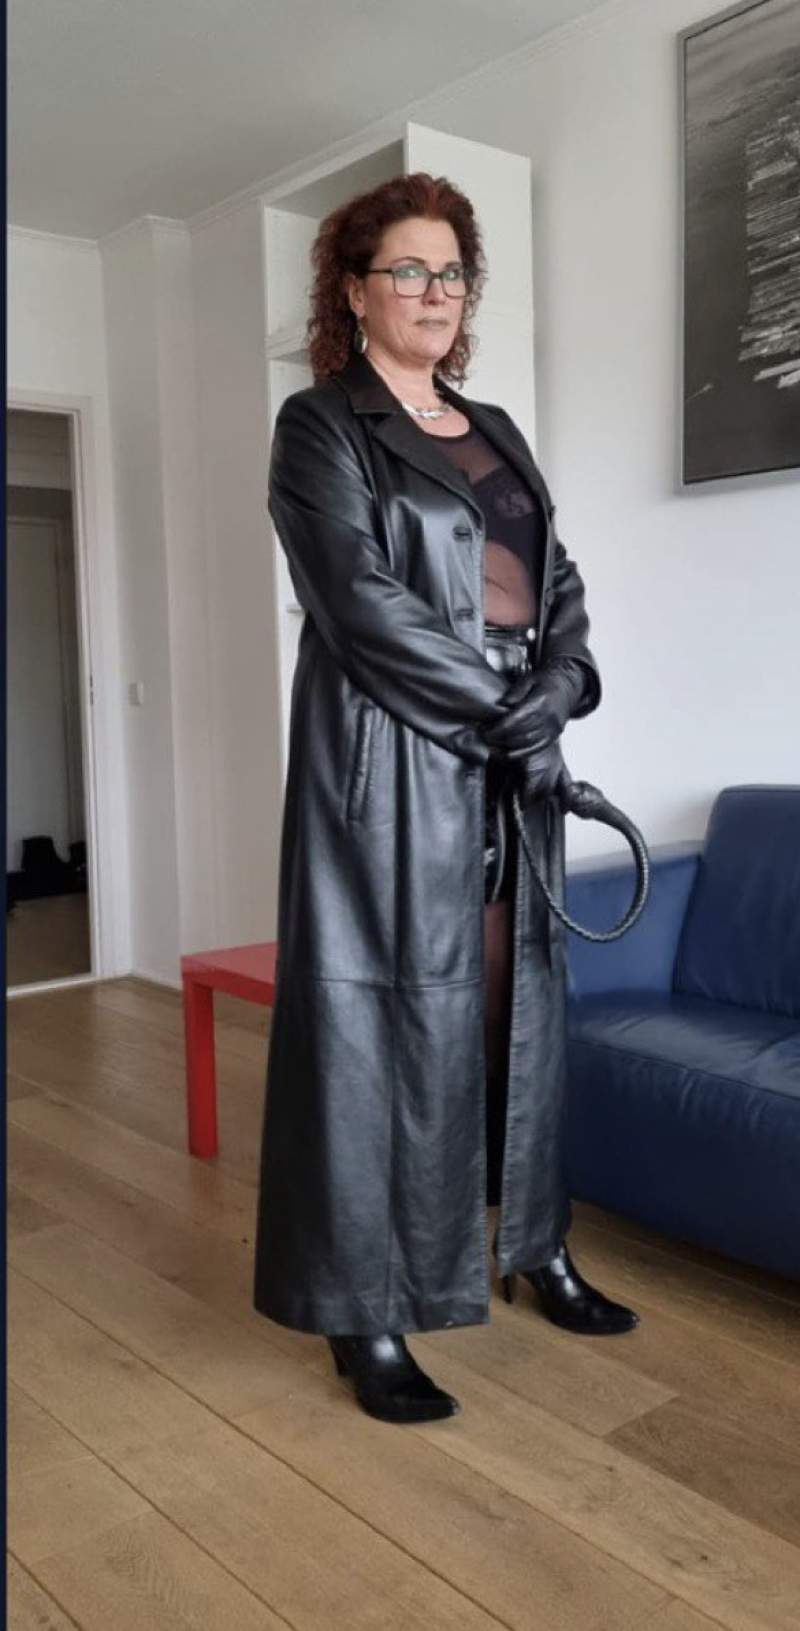 Dominant mistress Cynthia koeing sincerely seeking for a real submissive partner to serve and worship mistress in her dungeon